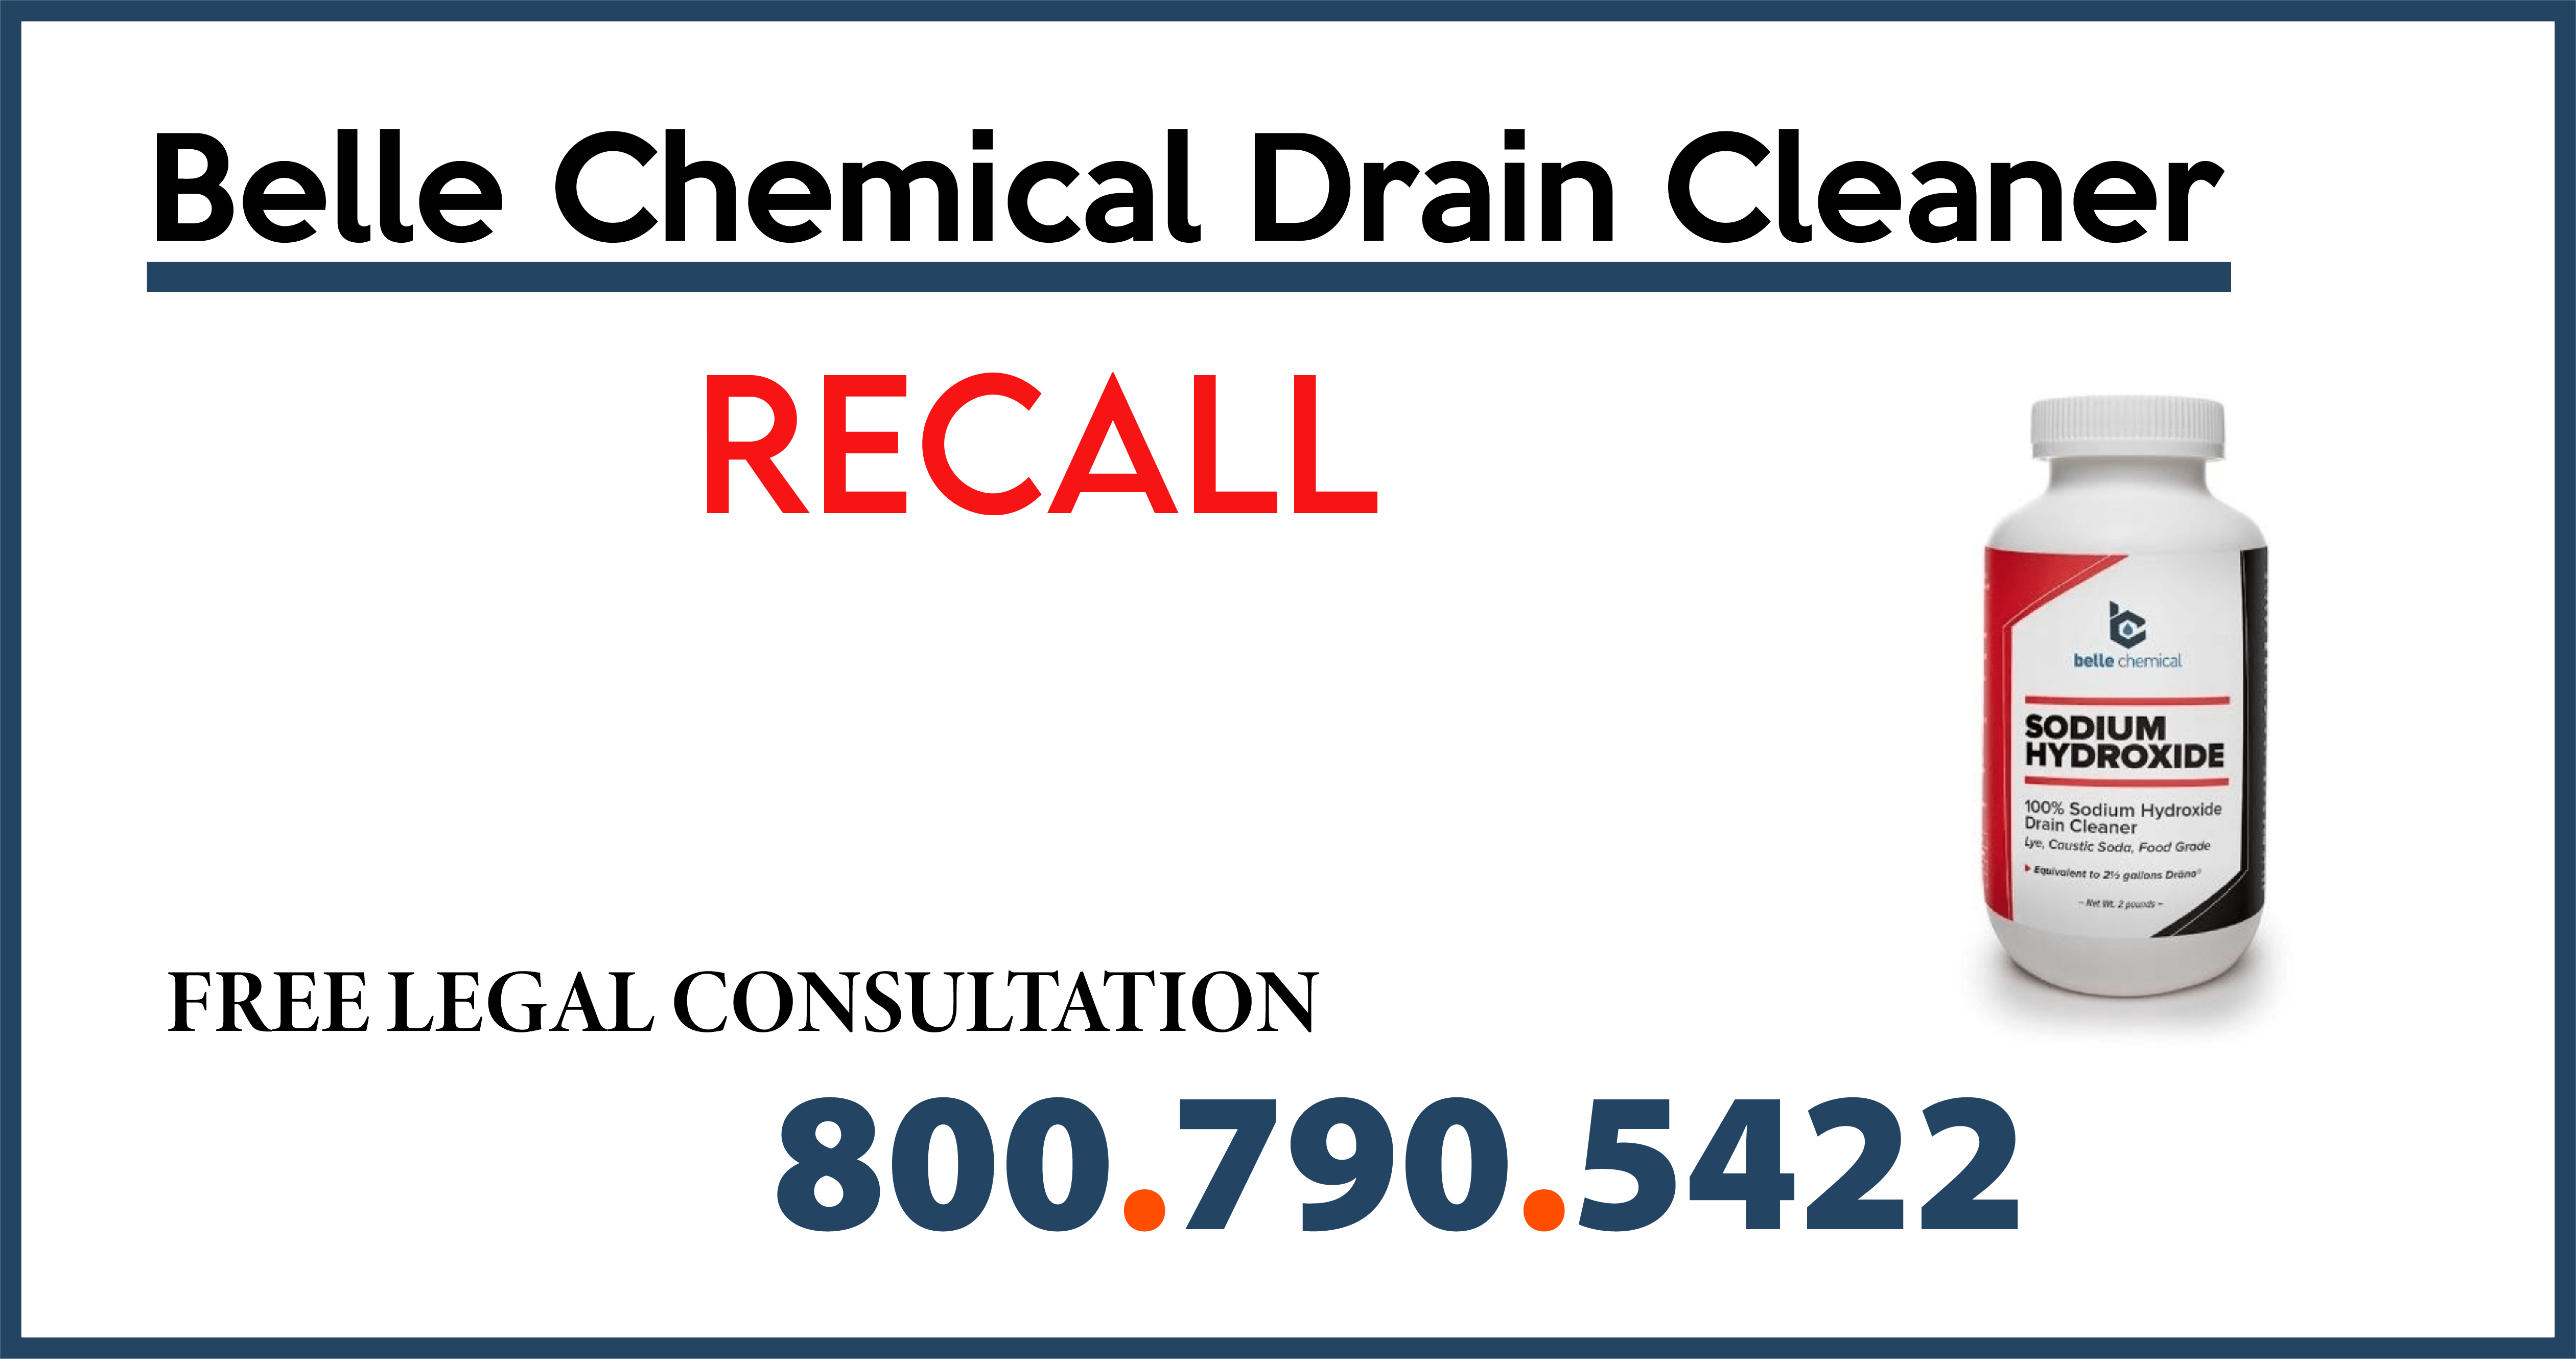 belle chemical drain cleaner recall product liability poisoning hazard compensation expenses suffering lawyer sue